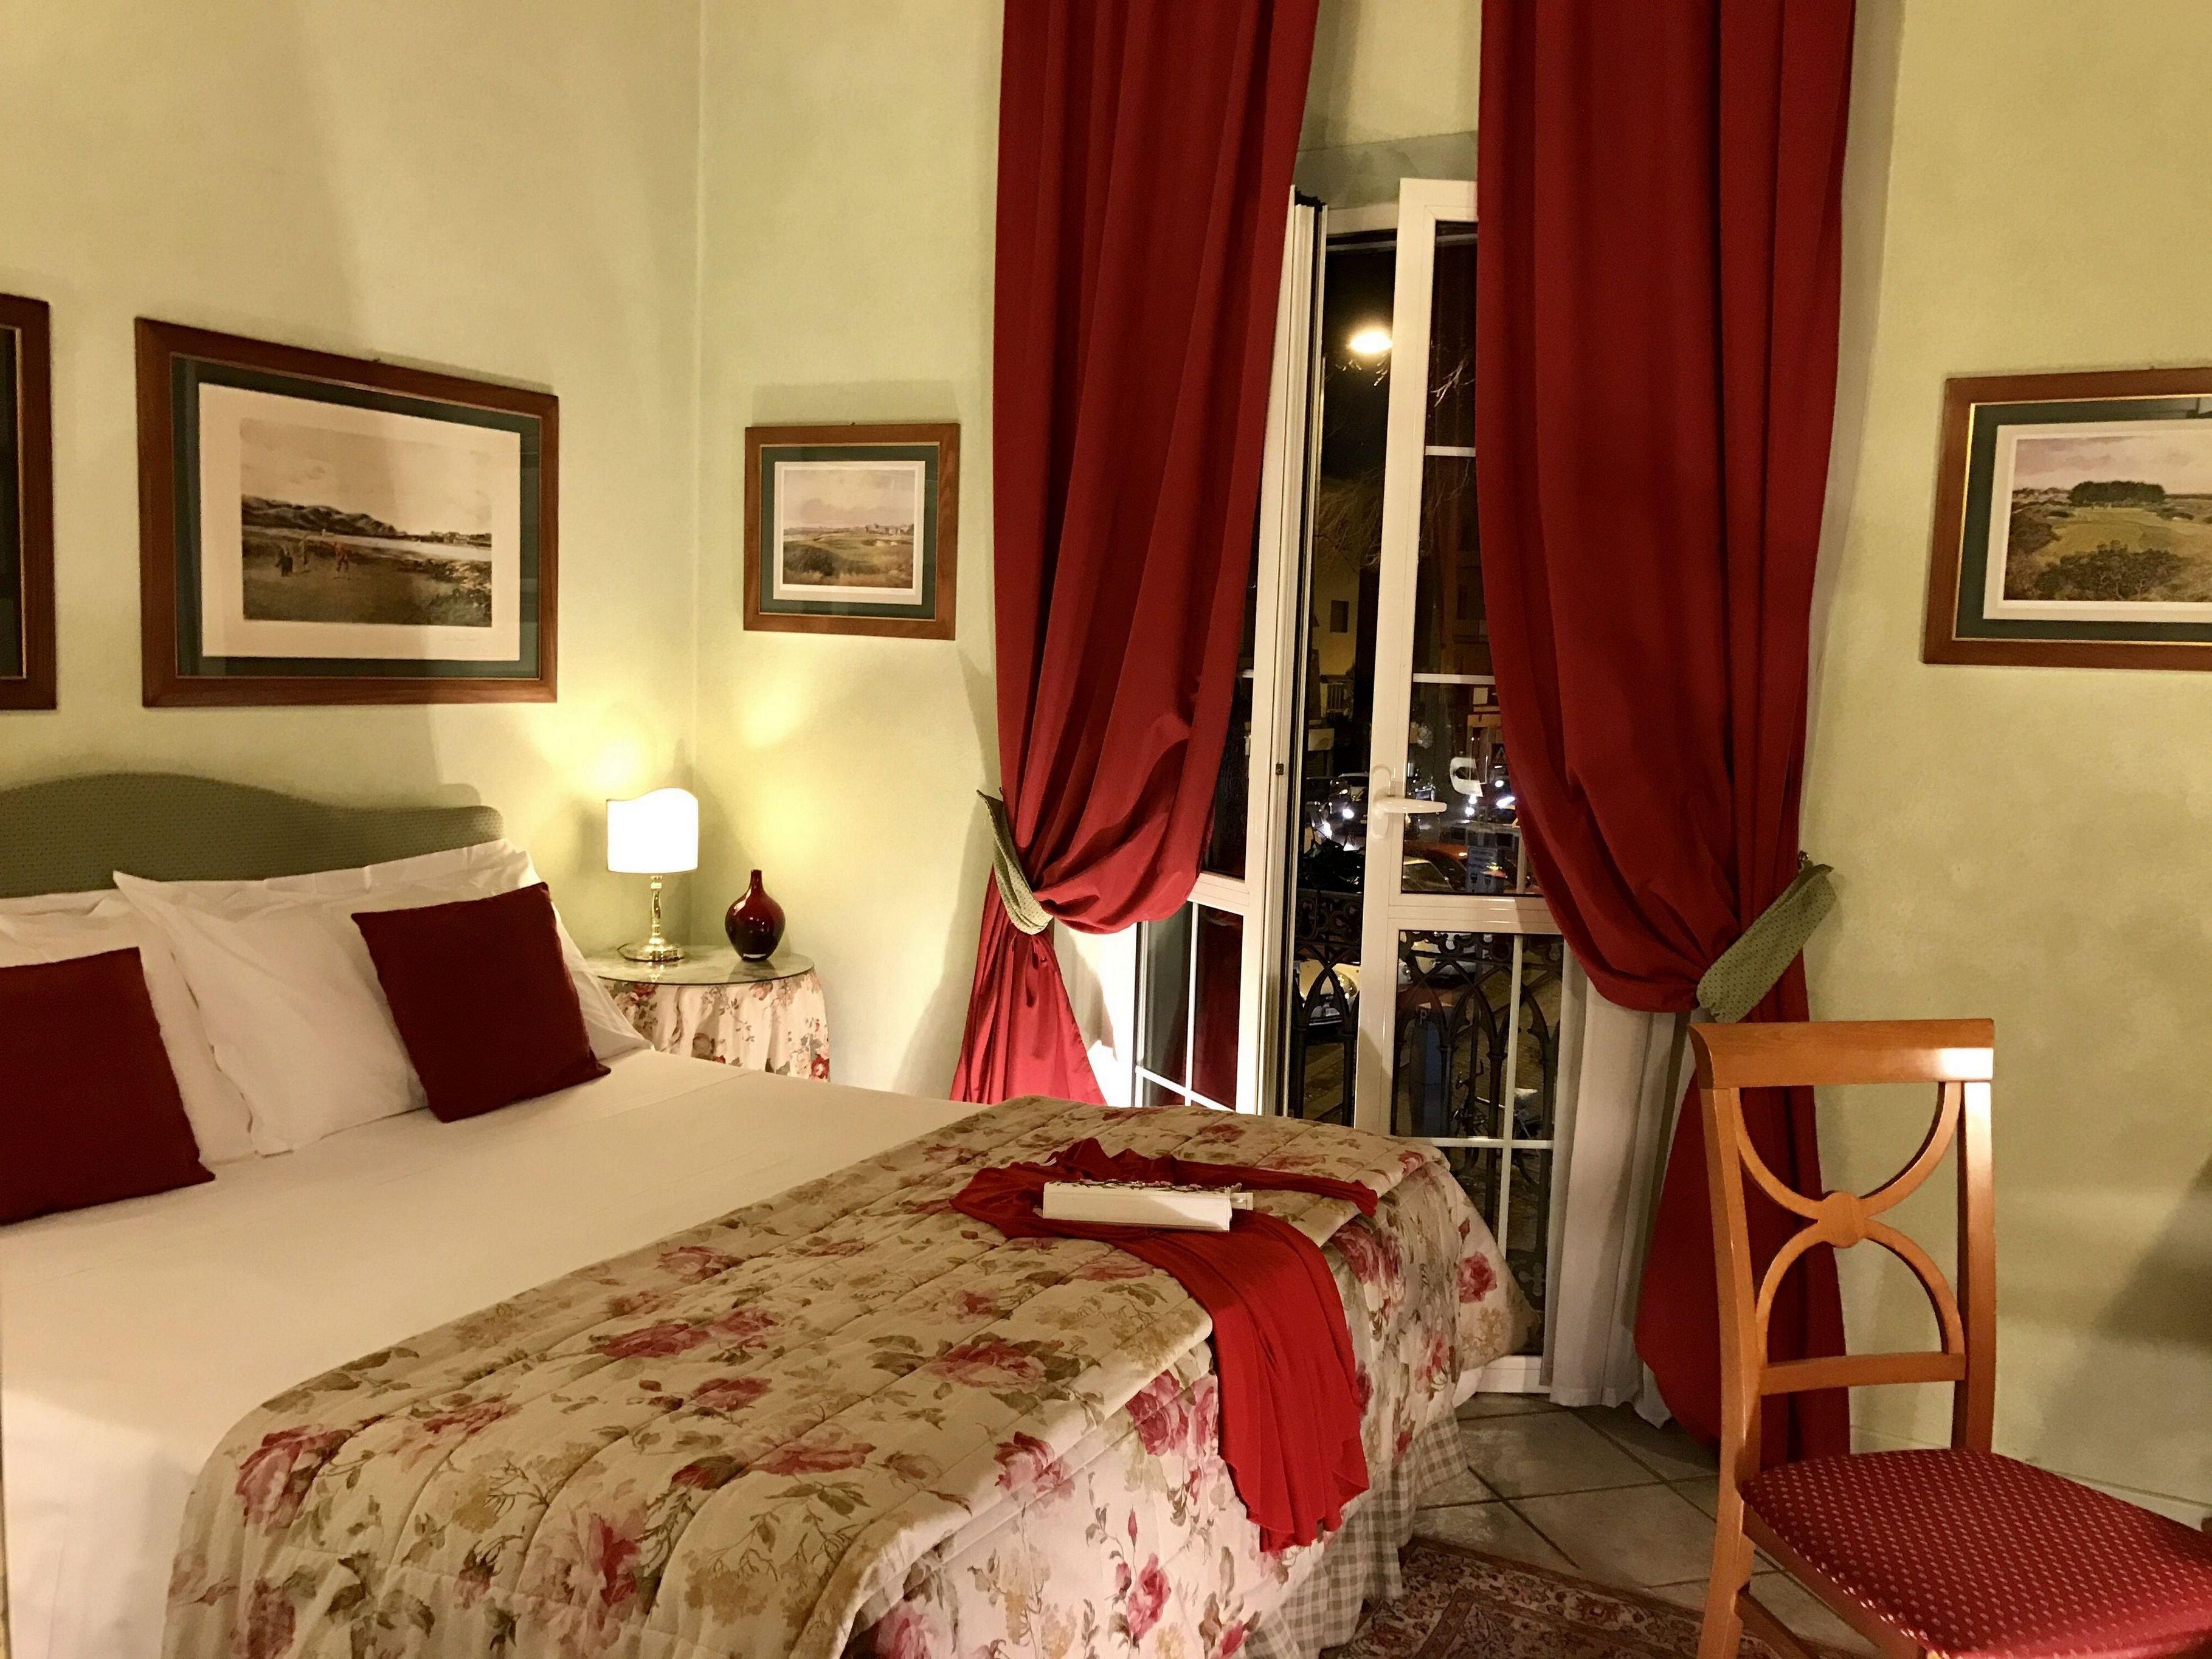 Classic Double Room is furnished with a queen-size bed or two twin beds, private bathroom, air-conditioning or heating, Smart Android TV 32 inch, minibar, electronic safe, direct dial phone, Wi-Fi. The bathroom is furnished with shower, make-up mirror and hair-drier.